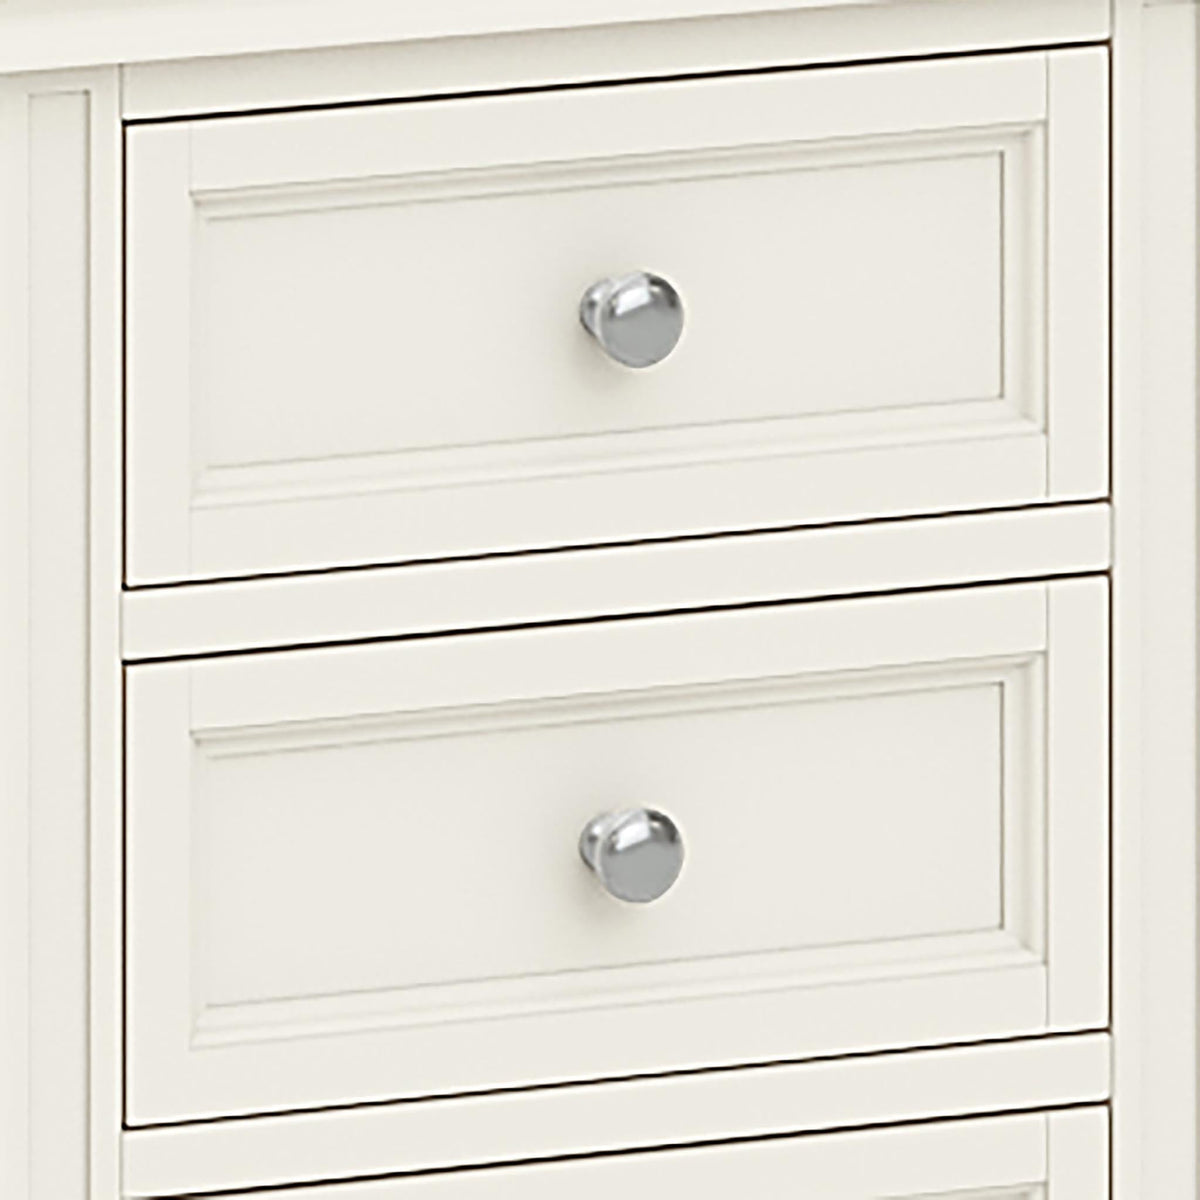 The Mulsanne Cream French Style Bedside Table with 3 Drawers - Close Up of Drawer